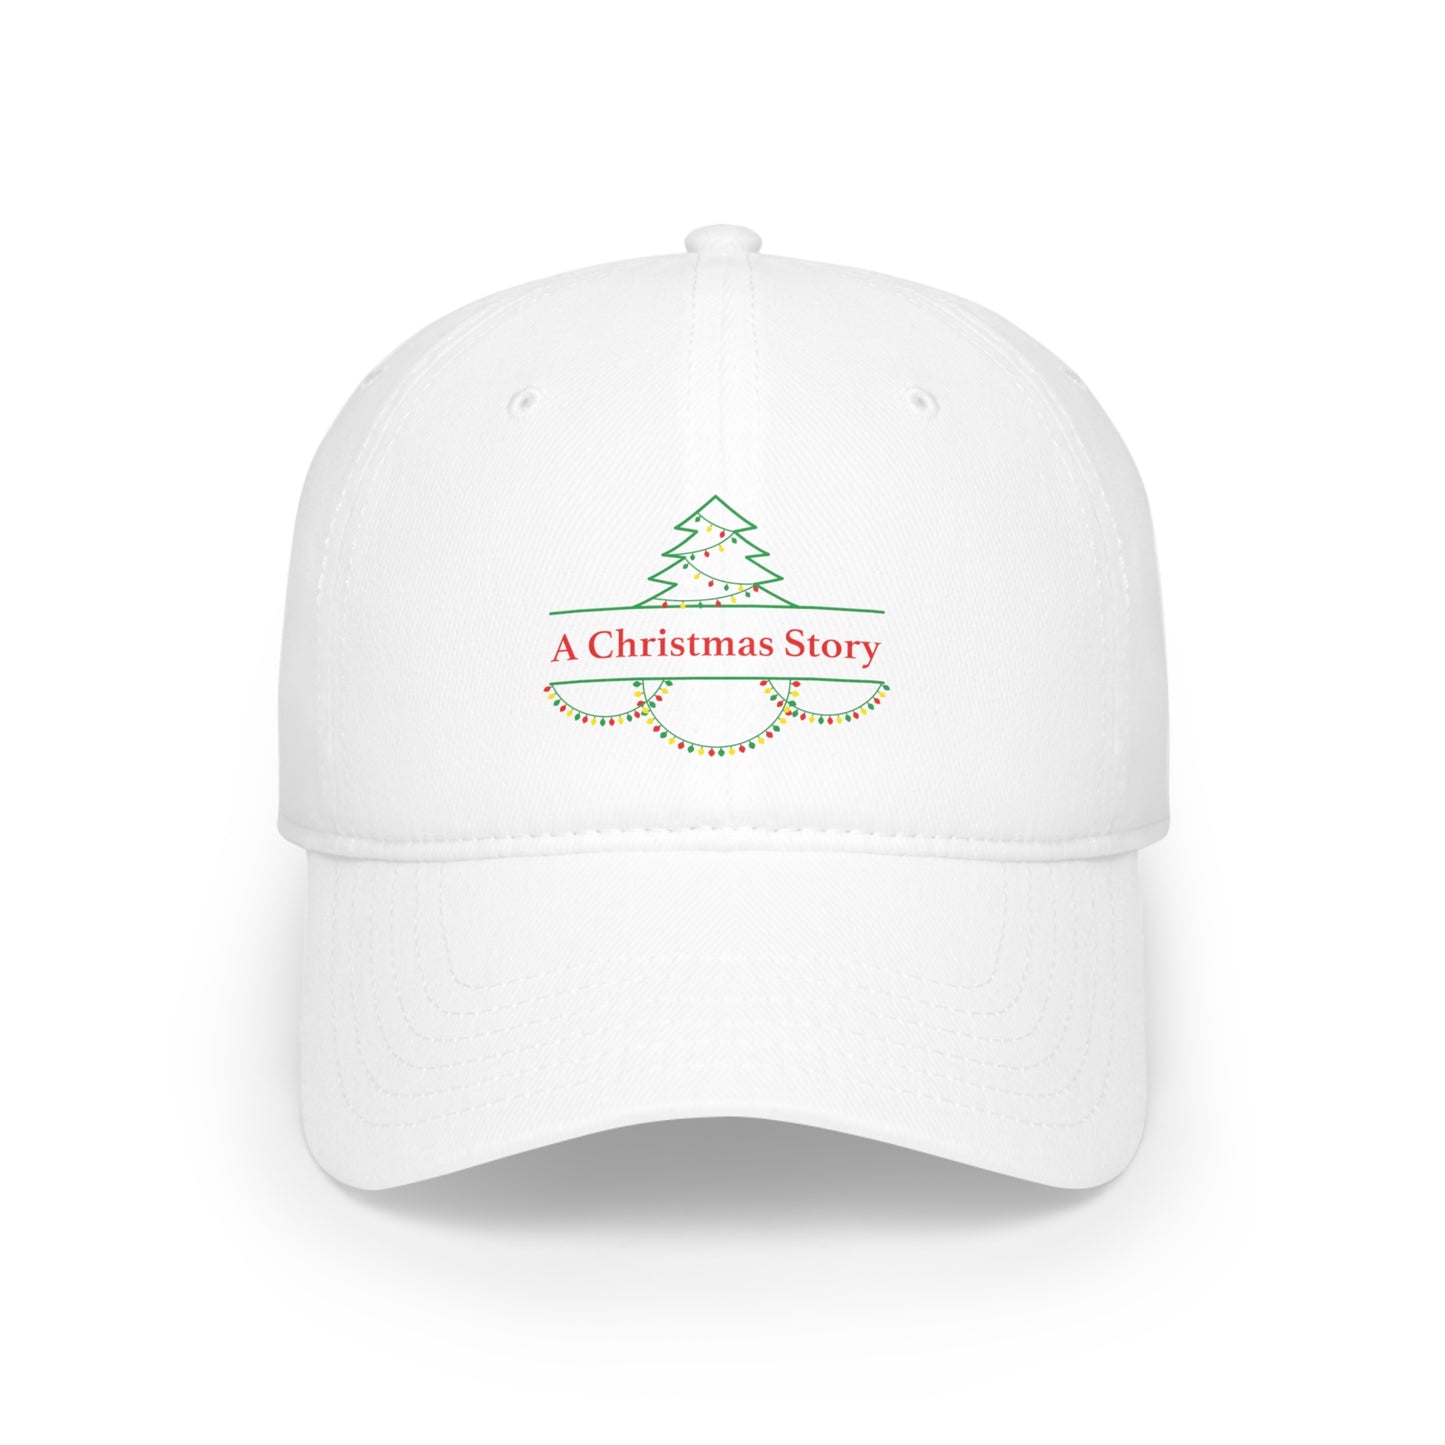 Give Without Expecting_ from A Christmas Story_Low Profile Baseball Cap